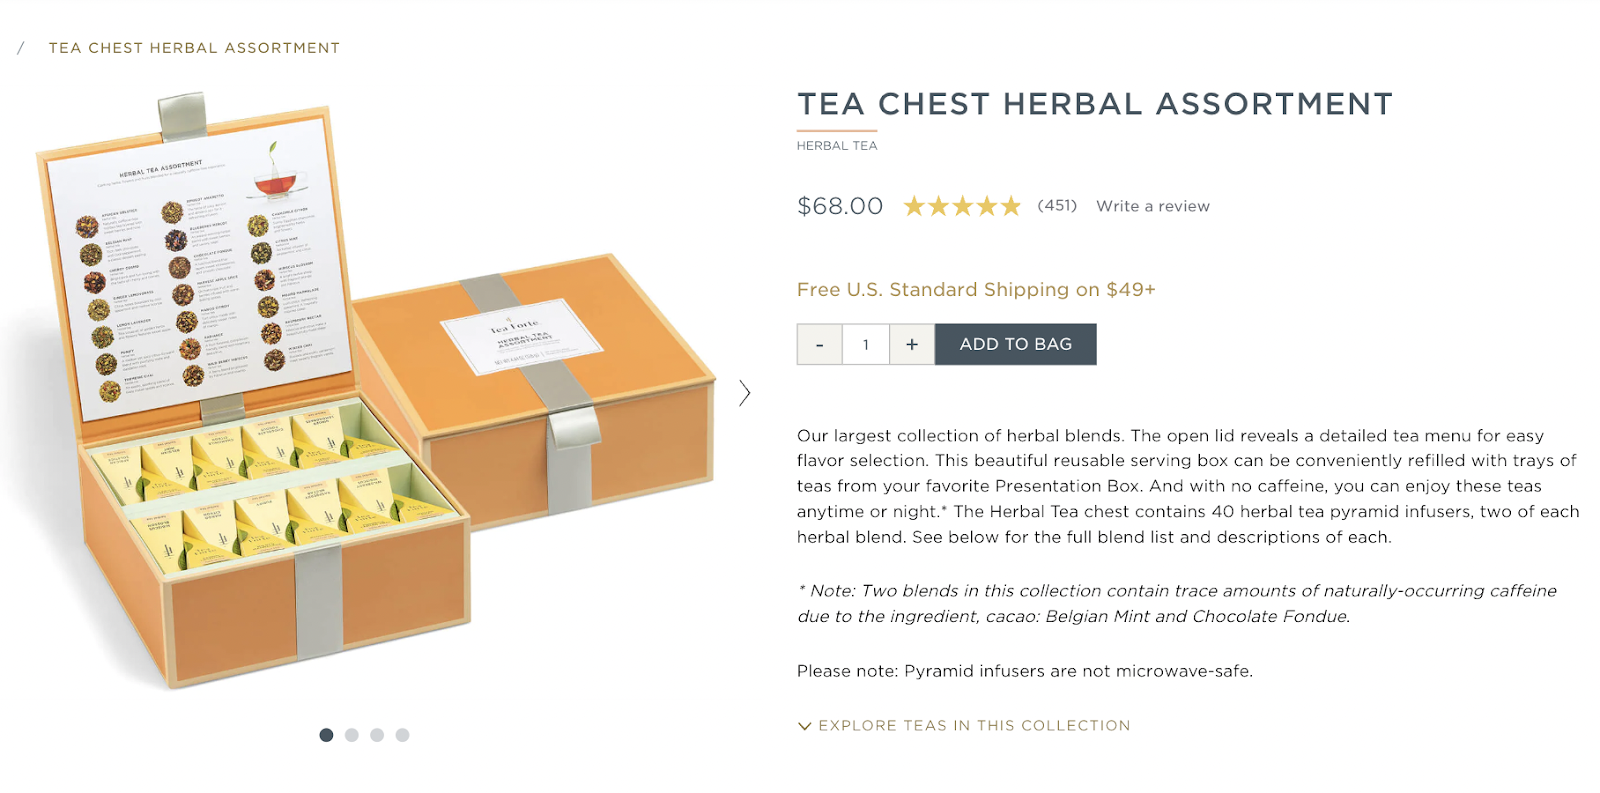 Tea chest herbal assortment from Etsy